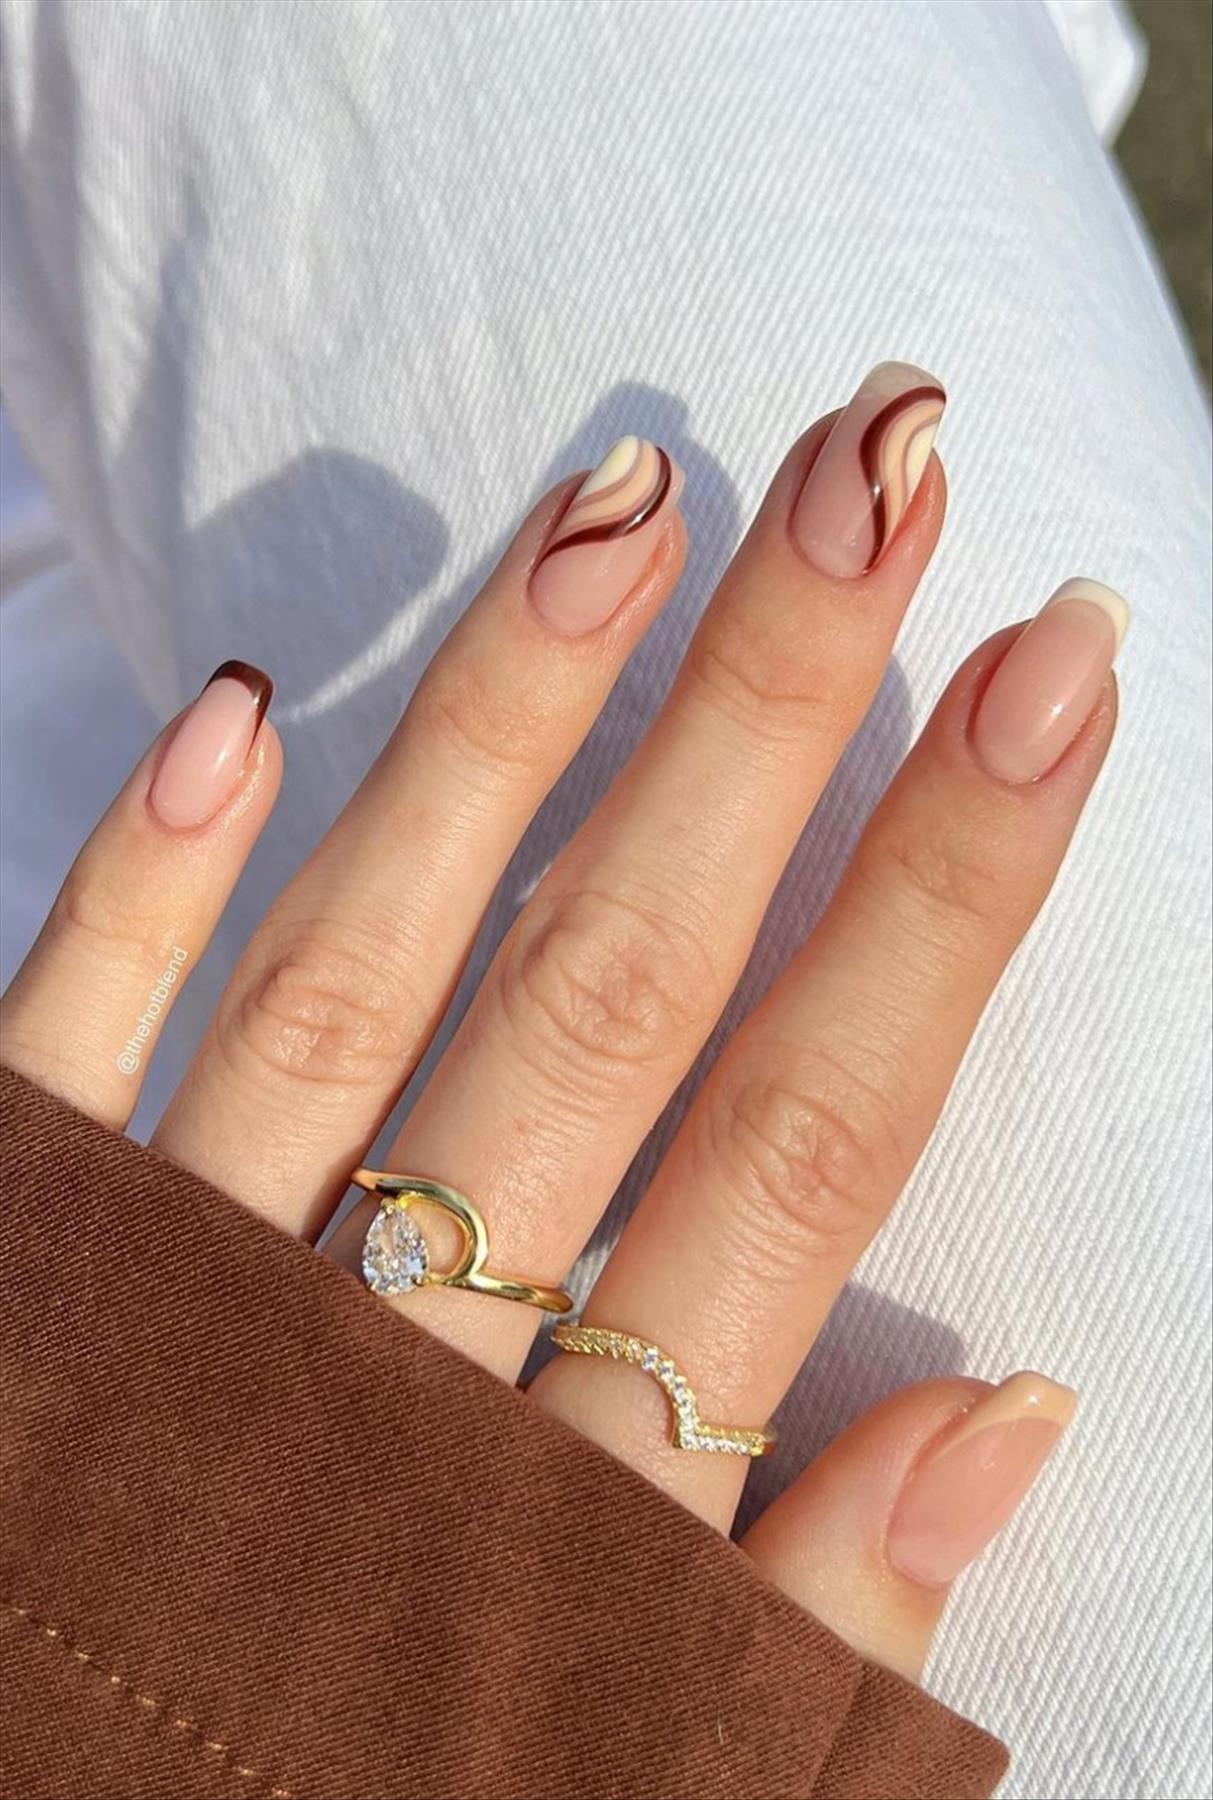 Elegant Nail Designs Ideas That You Must Try!